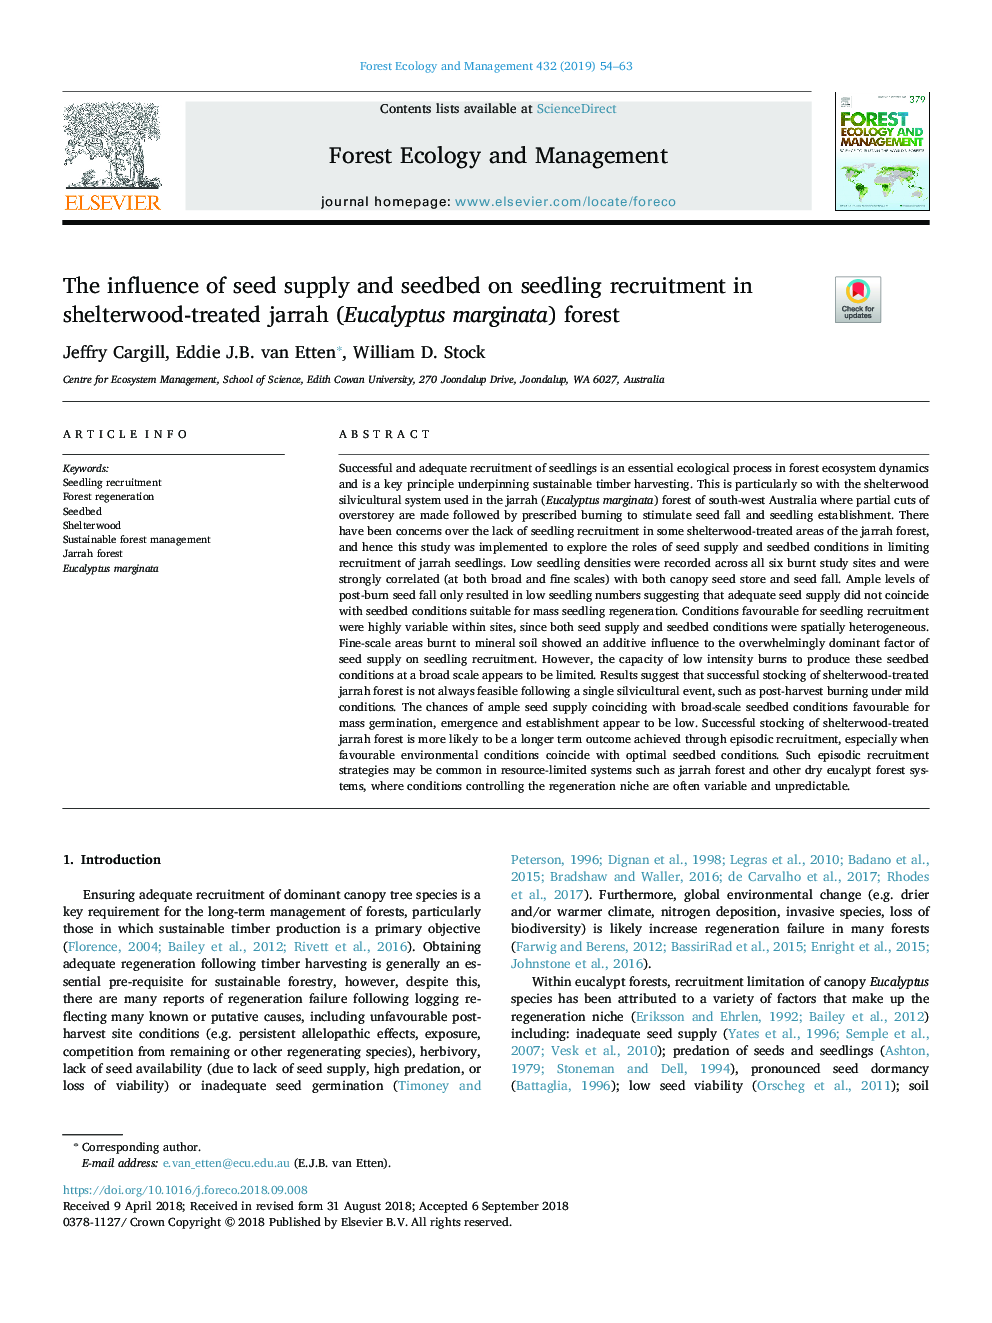 The influence of seed supply and seedbed on seedling recruitment in shelterwood-treated jarrah (Eucalyptus marginata) forest